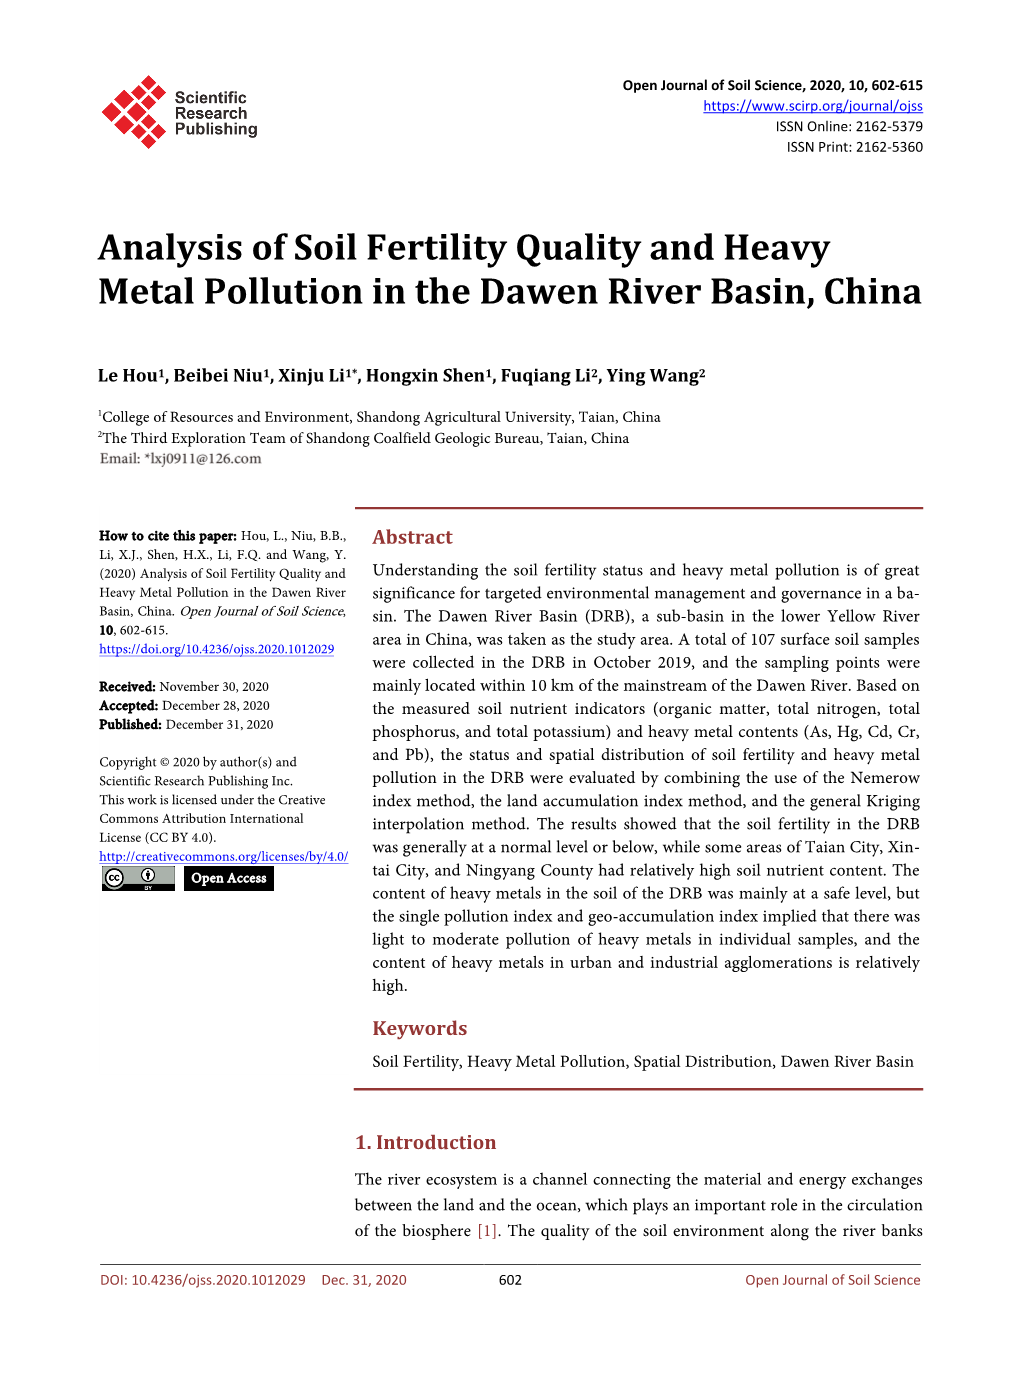 Analysis of Soil Fertility Quality and Heavy Metal Pollution in the Dawen River Basin, China